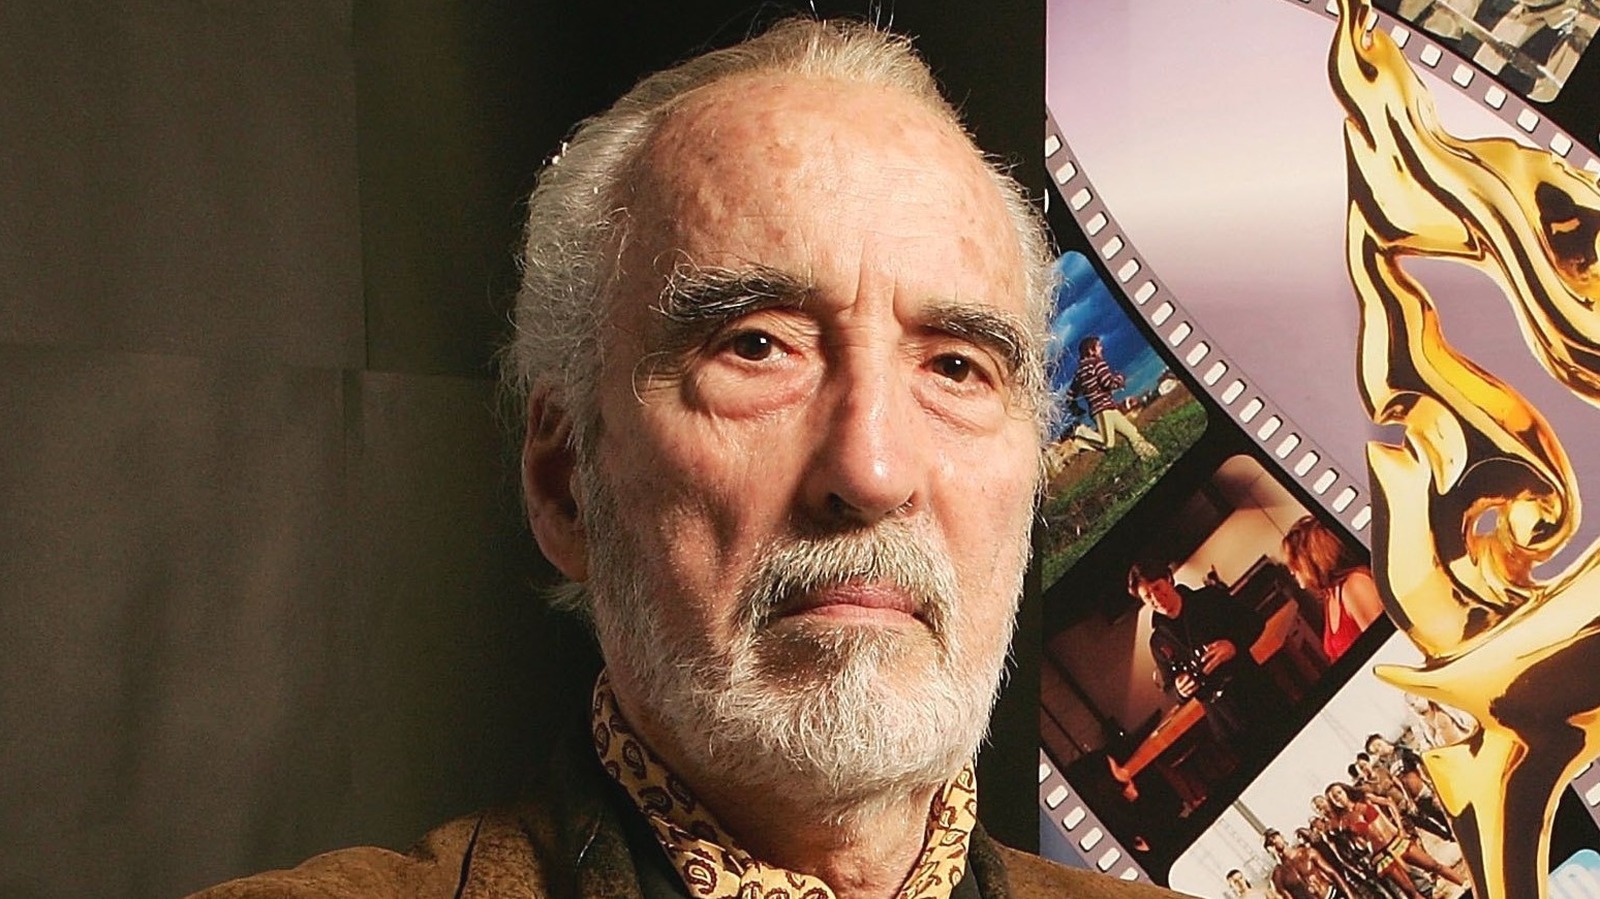 LOTR's Christopher Lee Holds A Record For Playing This Horror Classic